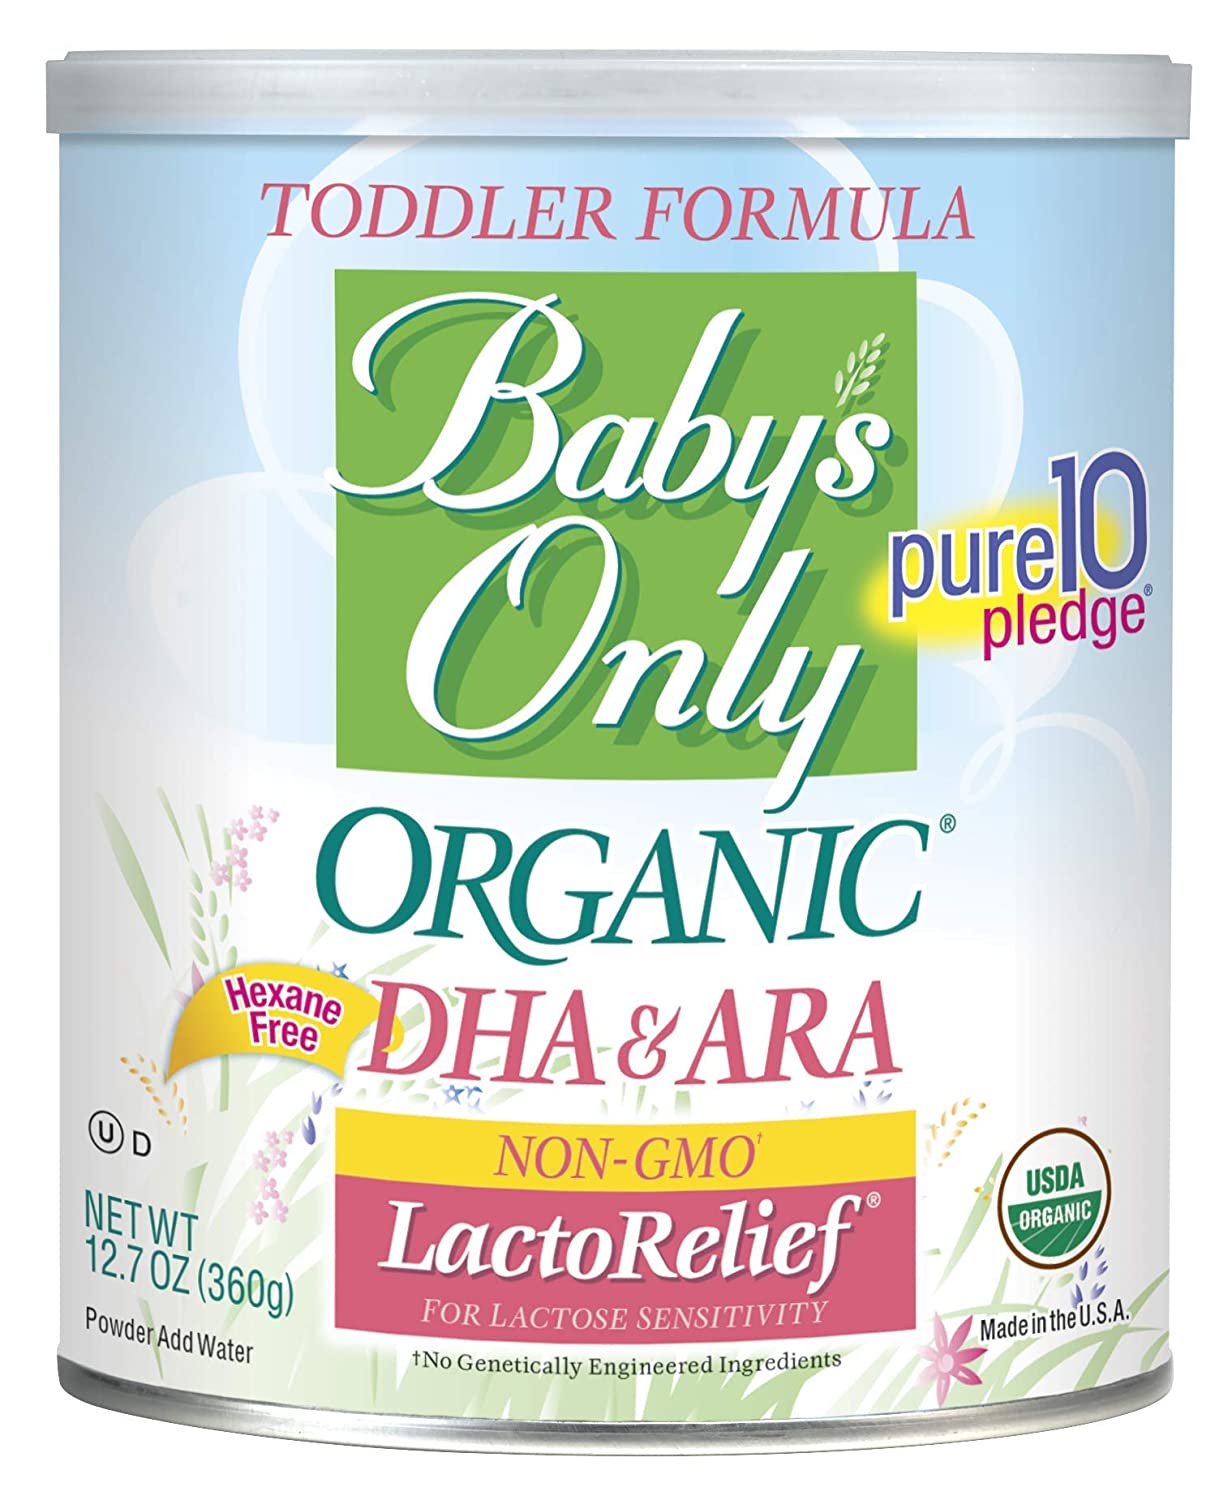 Baby's Only Organic Non-GMO LactoRelief with DHA & ARA Toddler Formula